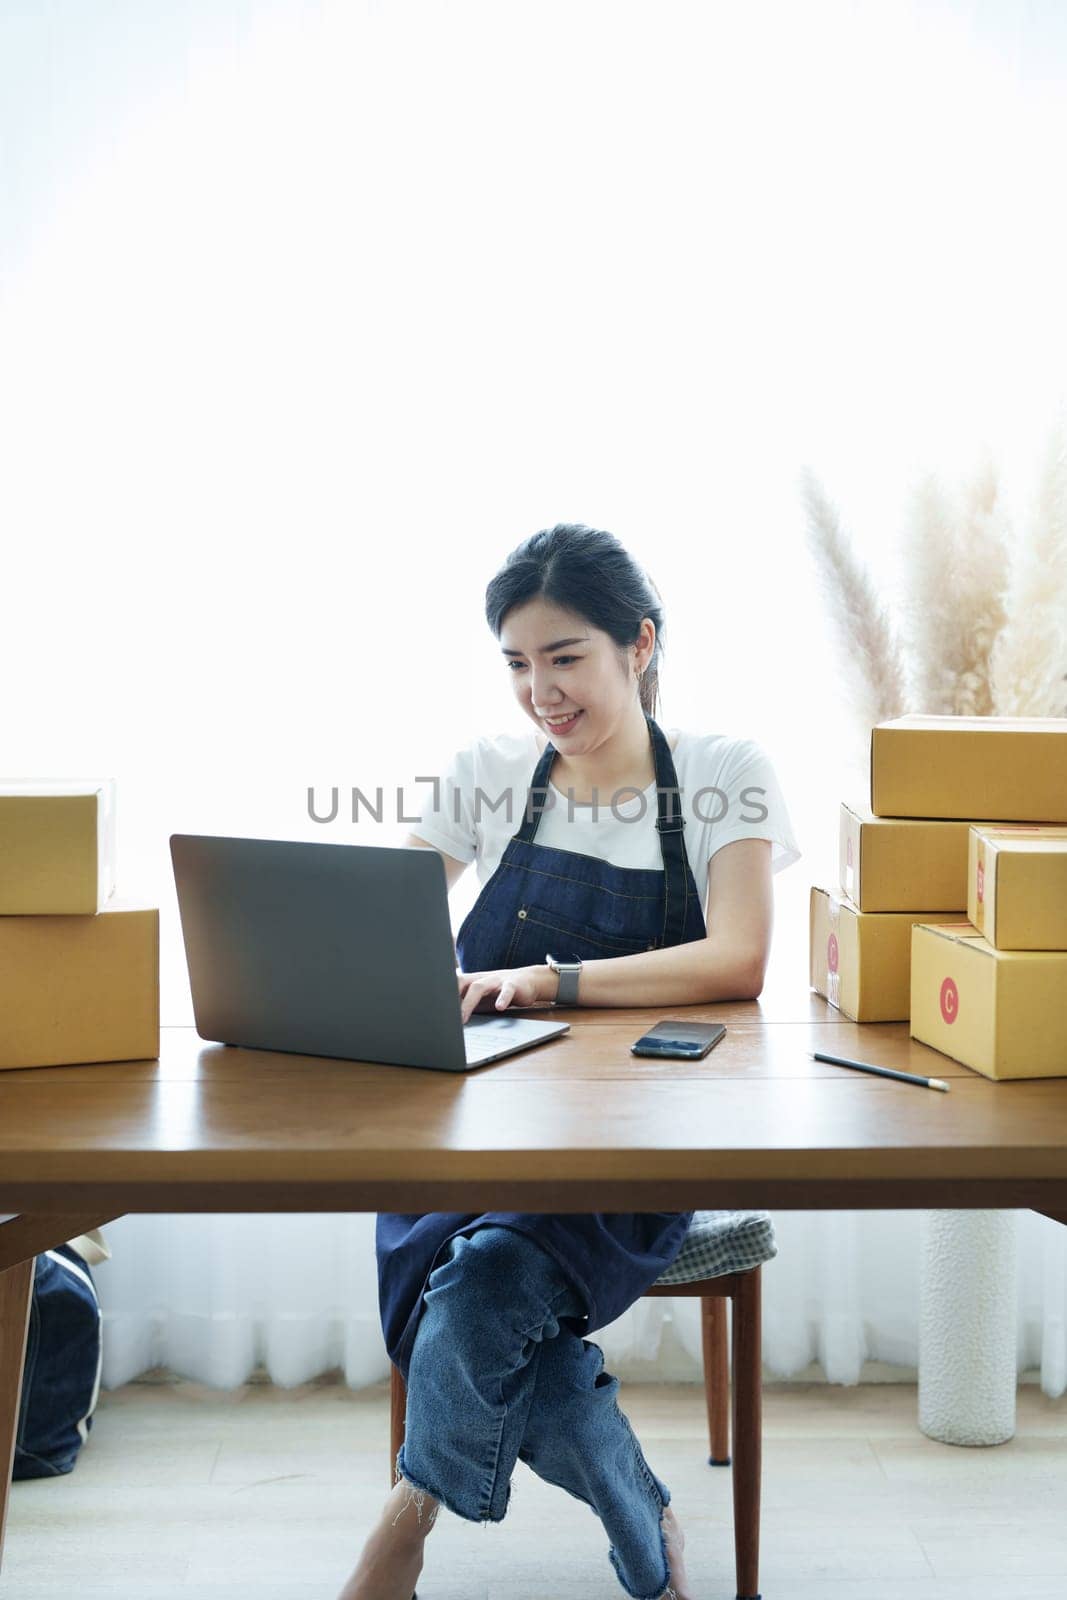 Starting small business entrepreneur of independent Asian woman smiling using laptop computer with cheerful success of online marketing package box items and SME delivery concept.